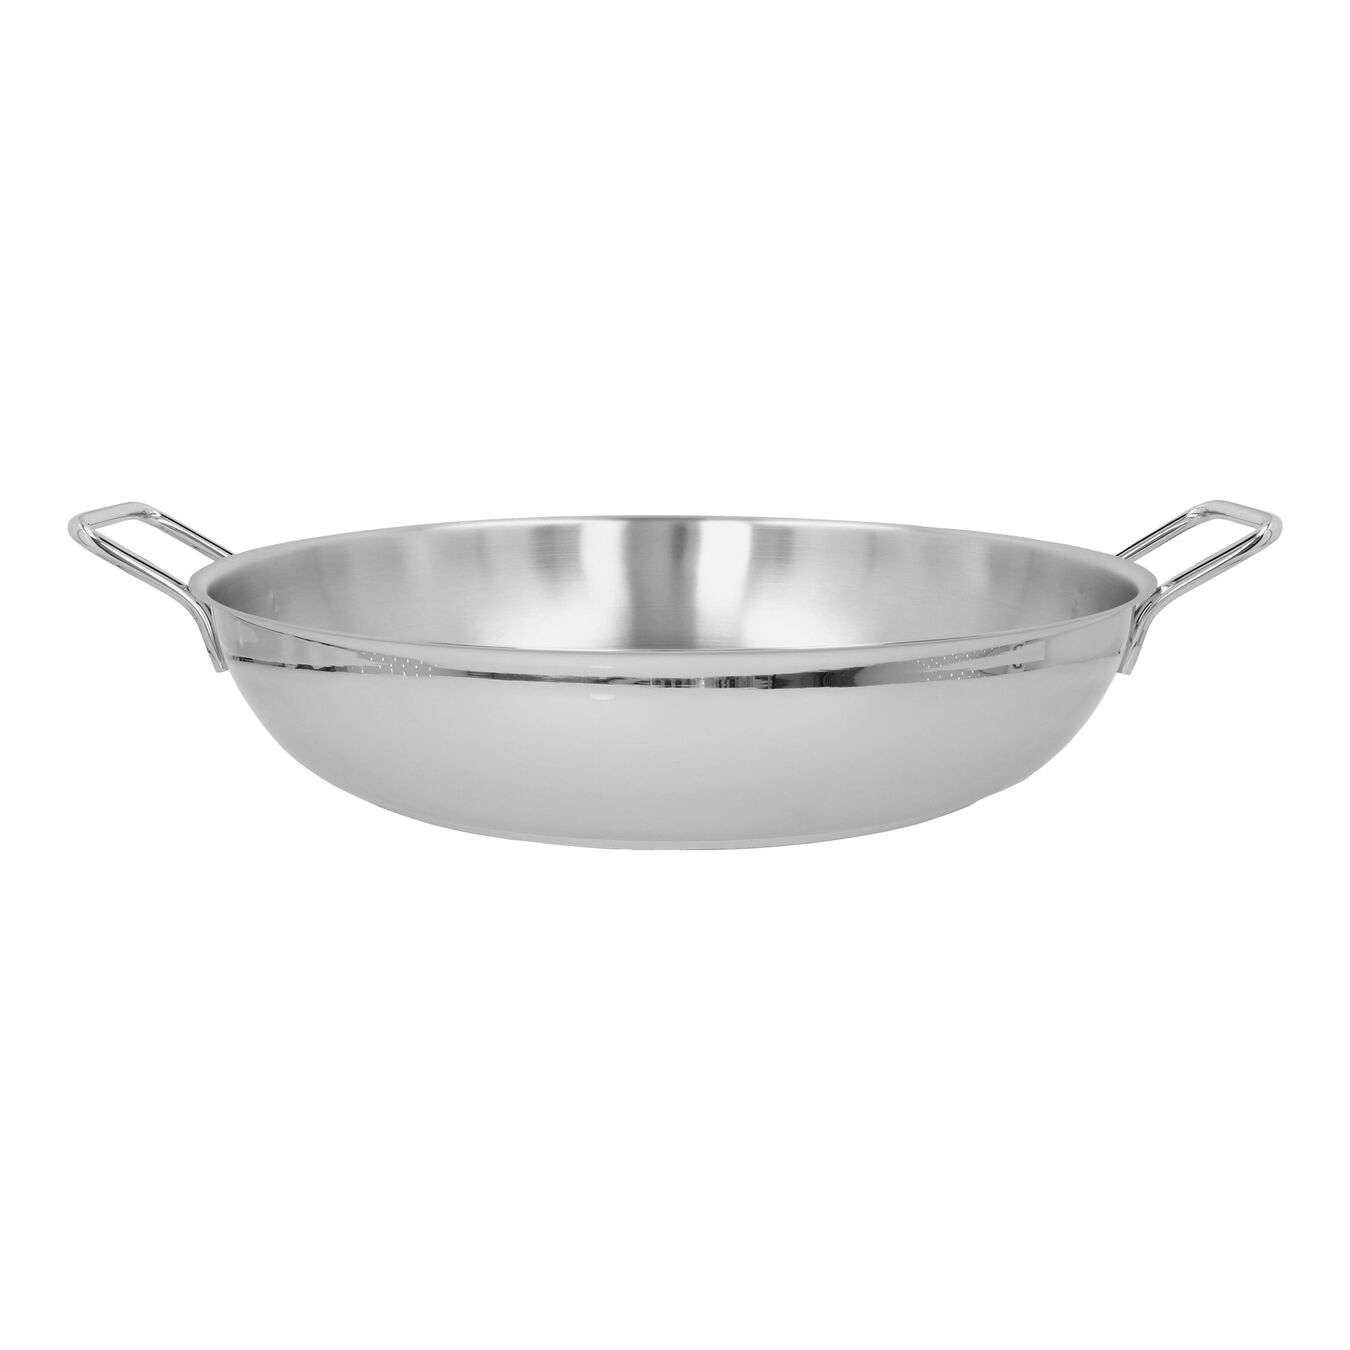 18-inch, Paella pan without lid, silver,,large 1